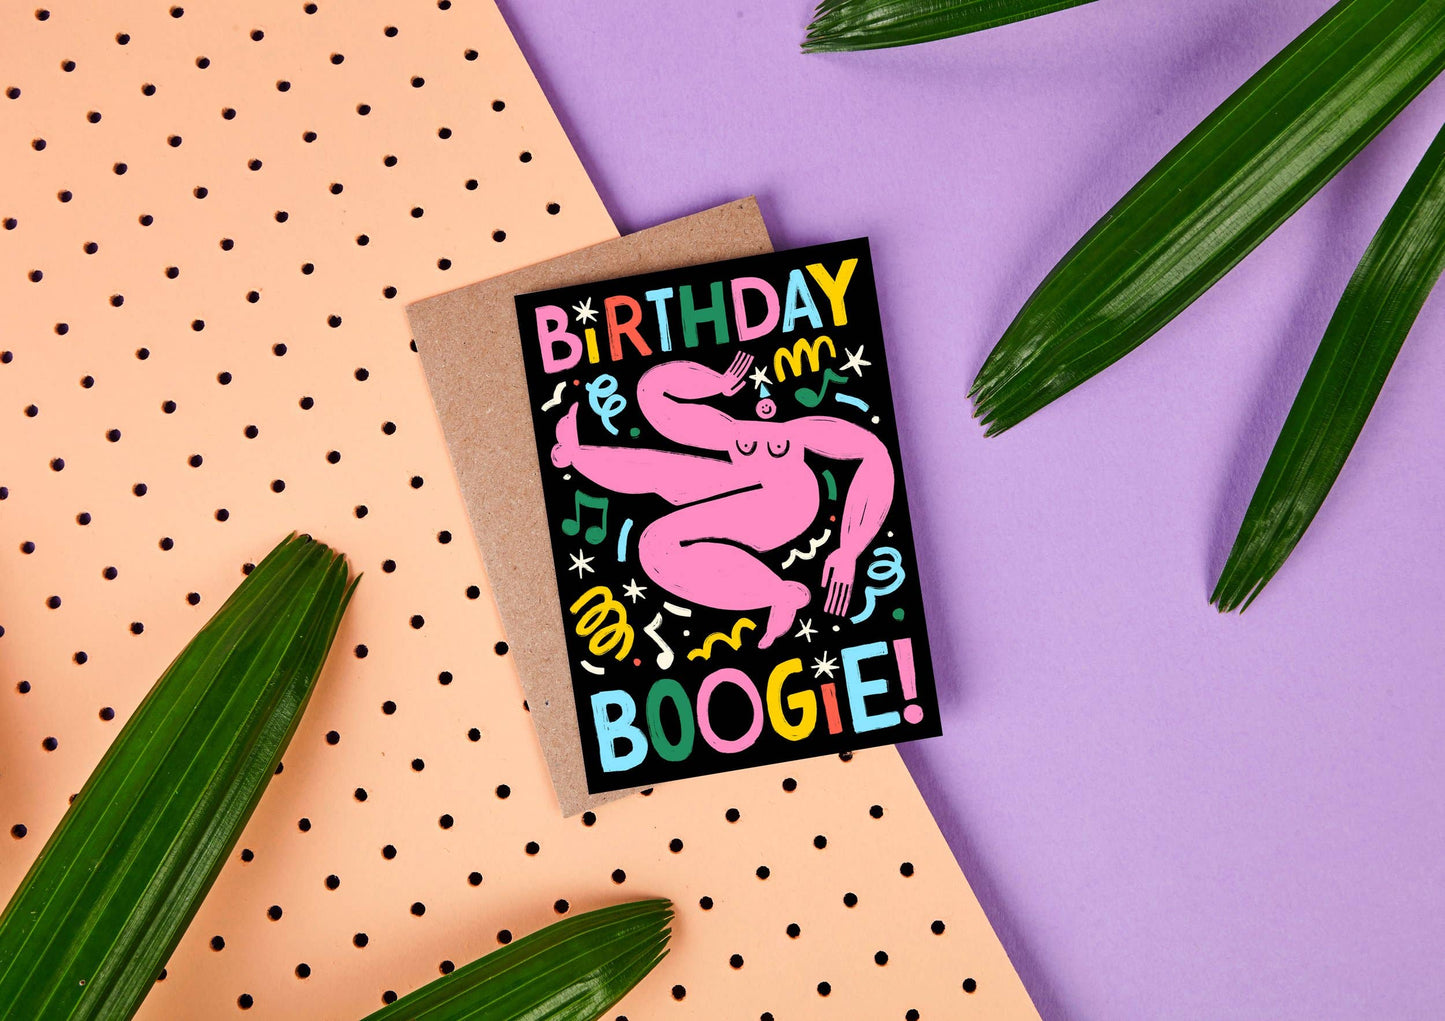 Rumble Cards - Birthday Boogie - Birthday Card - Naked Dancing